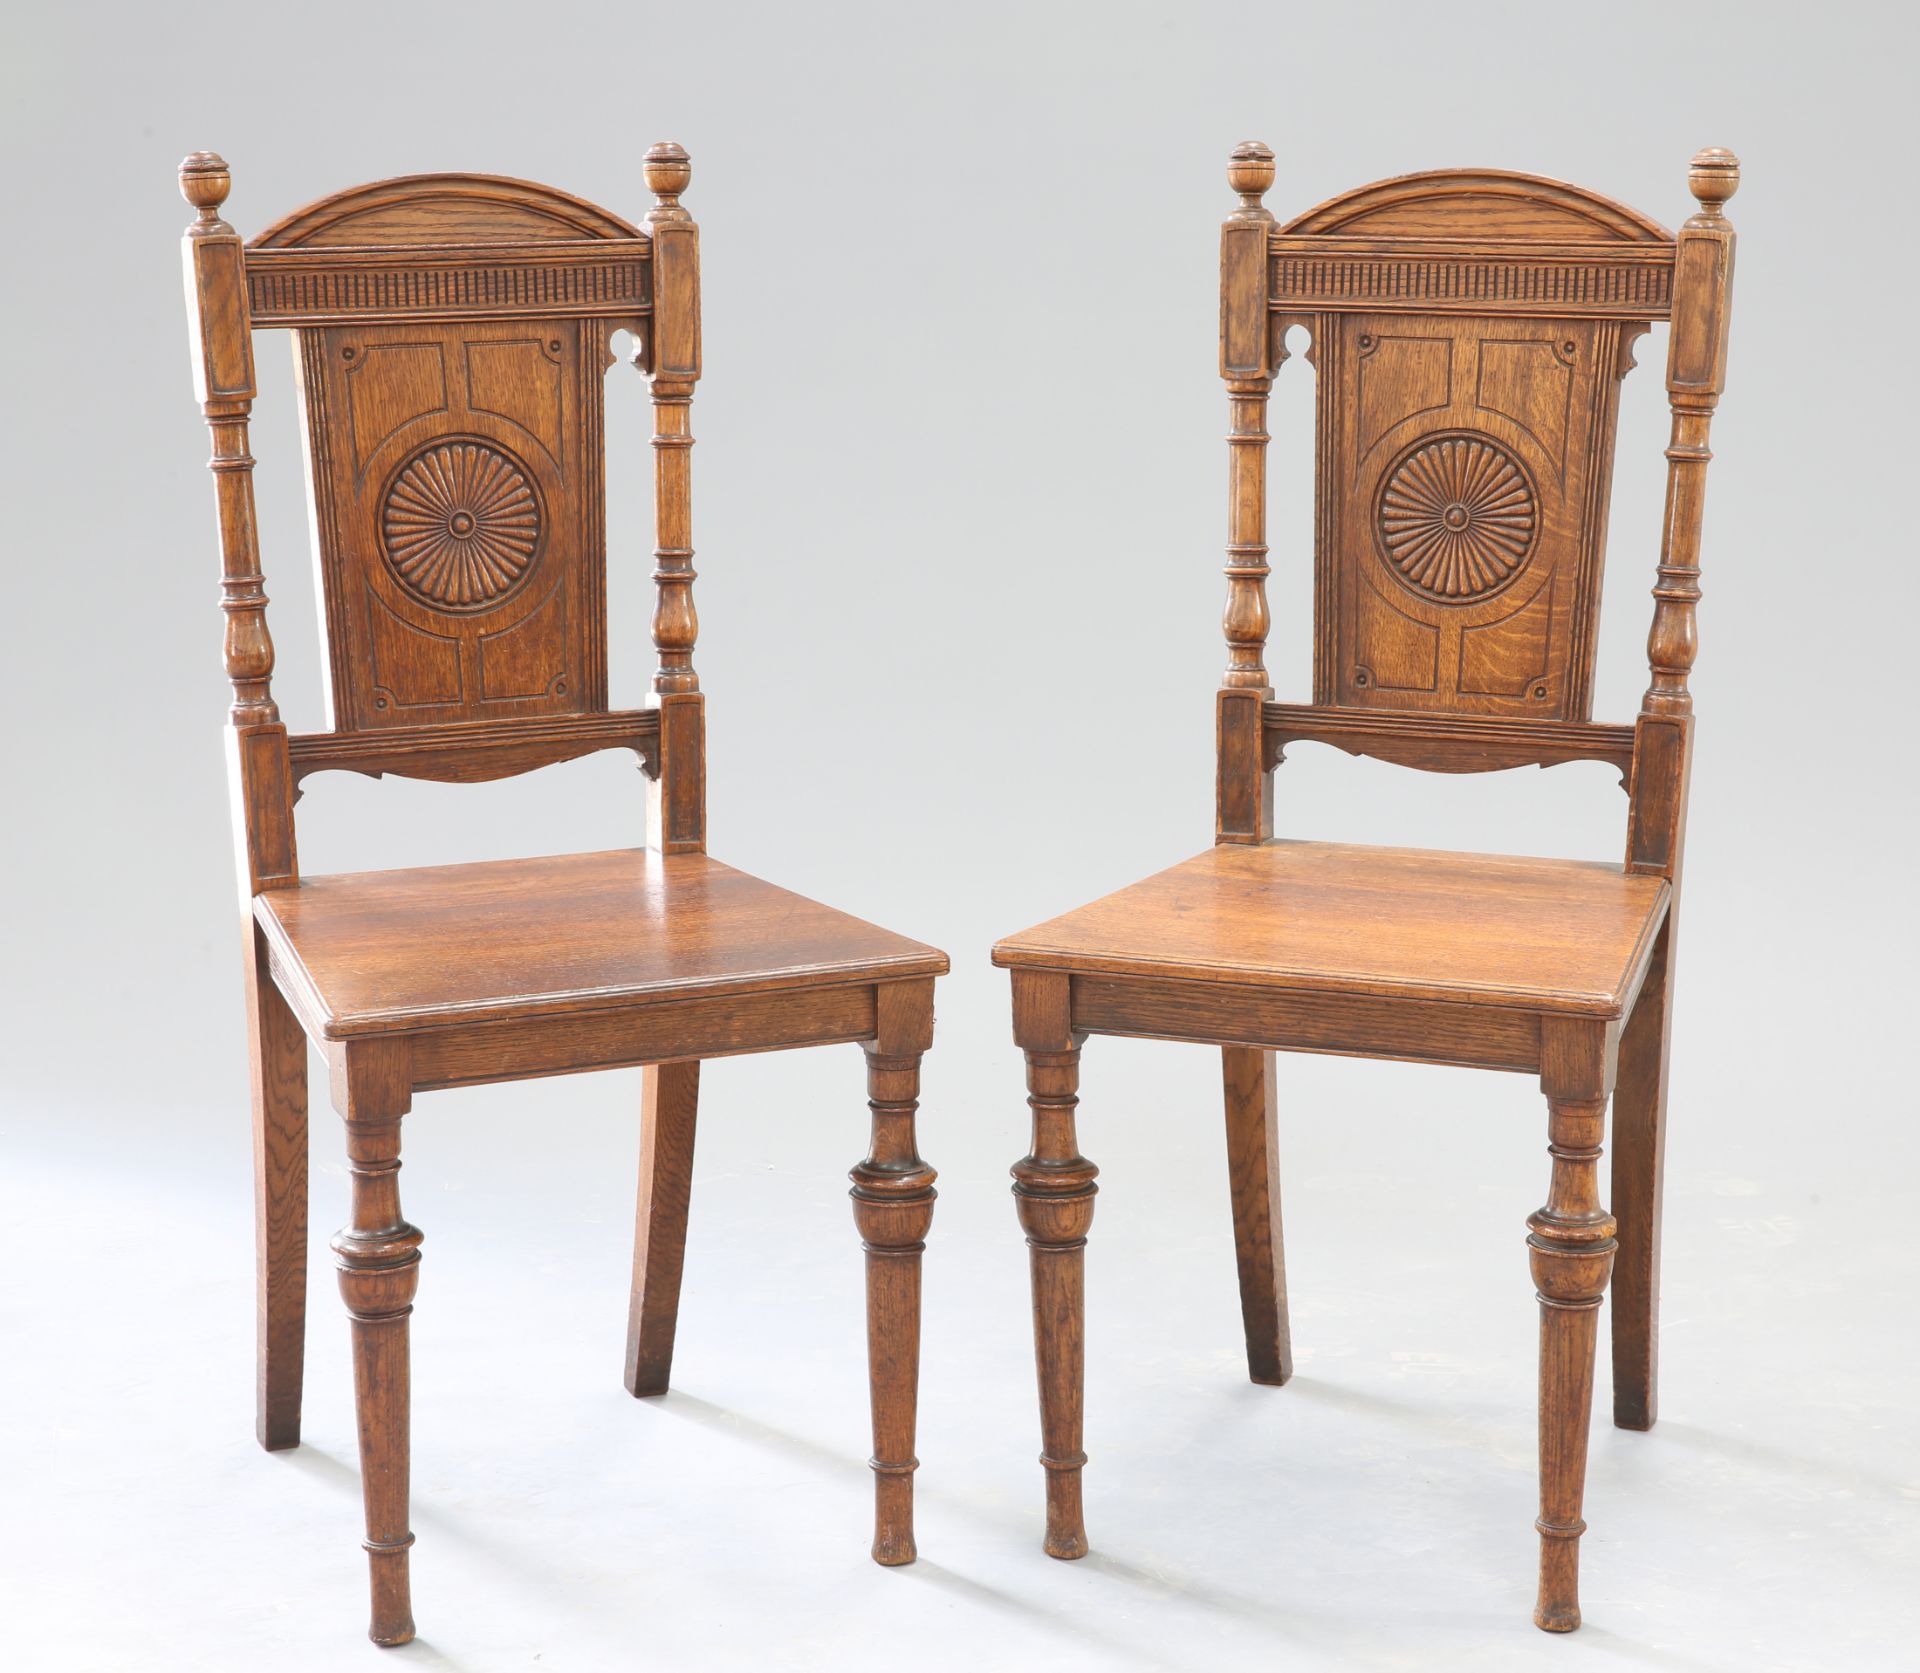 A PAIR OF AESTHETIC MOVEMENT OAK HALL CHAIRS, CIRCA 1880